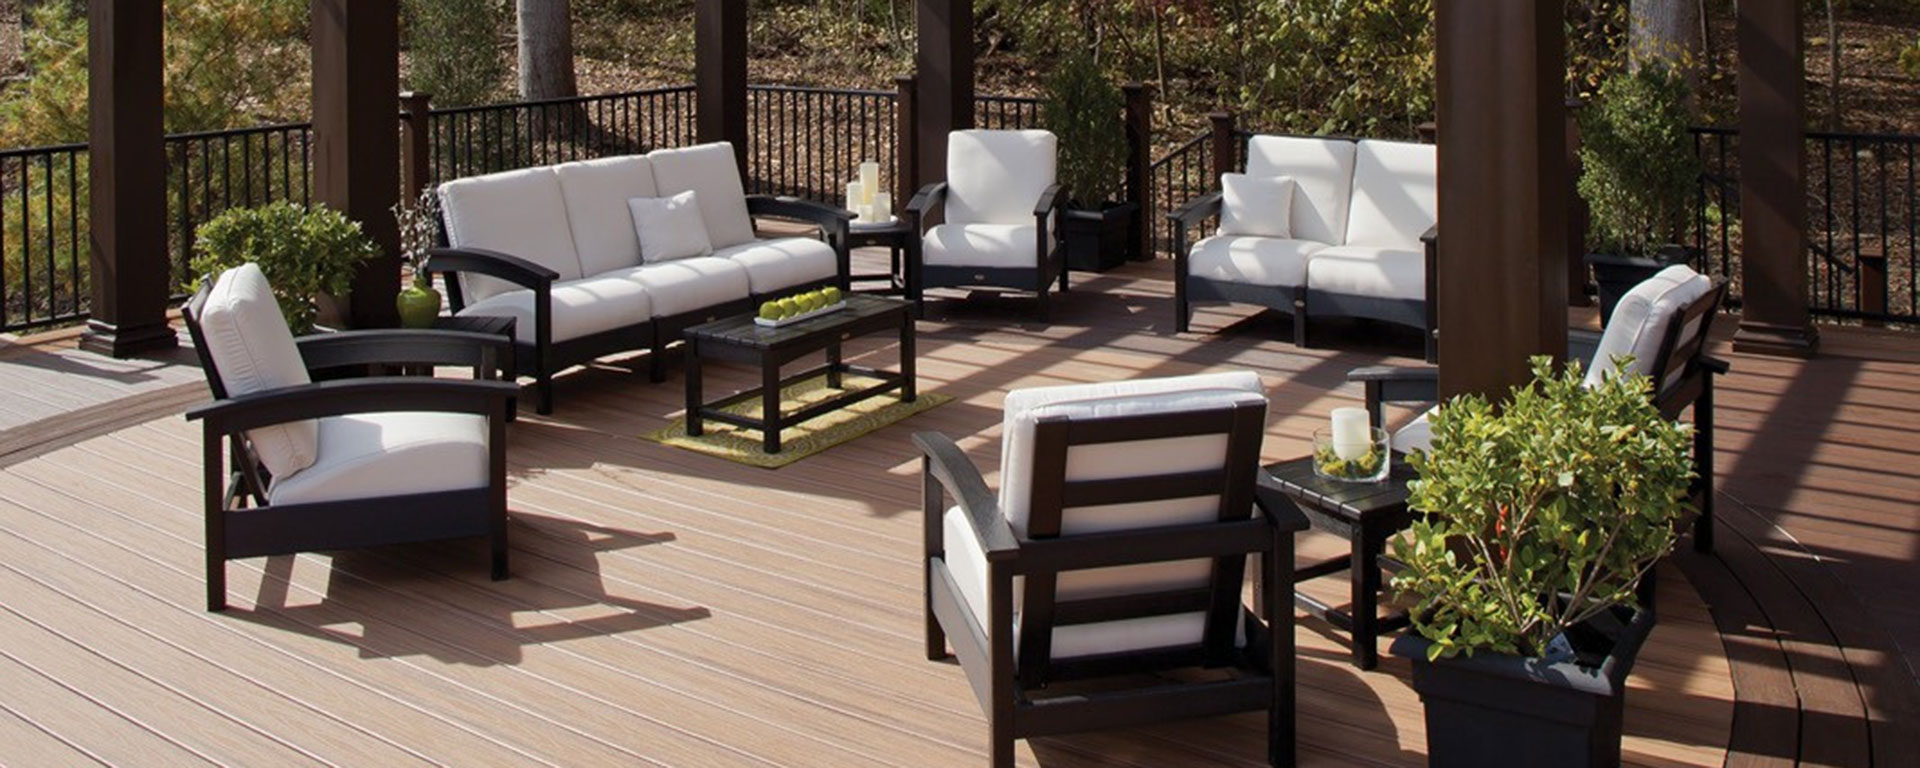 Trex-Furniture-Outdoor-Living-Finest-FEATURED